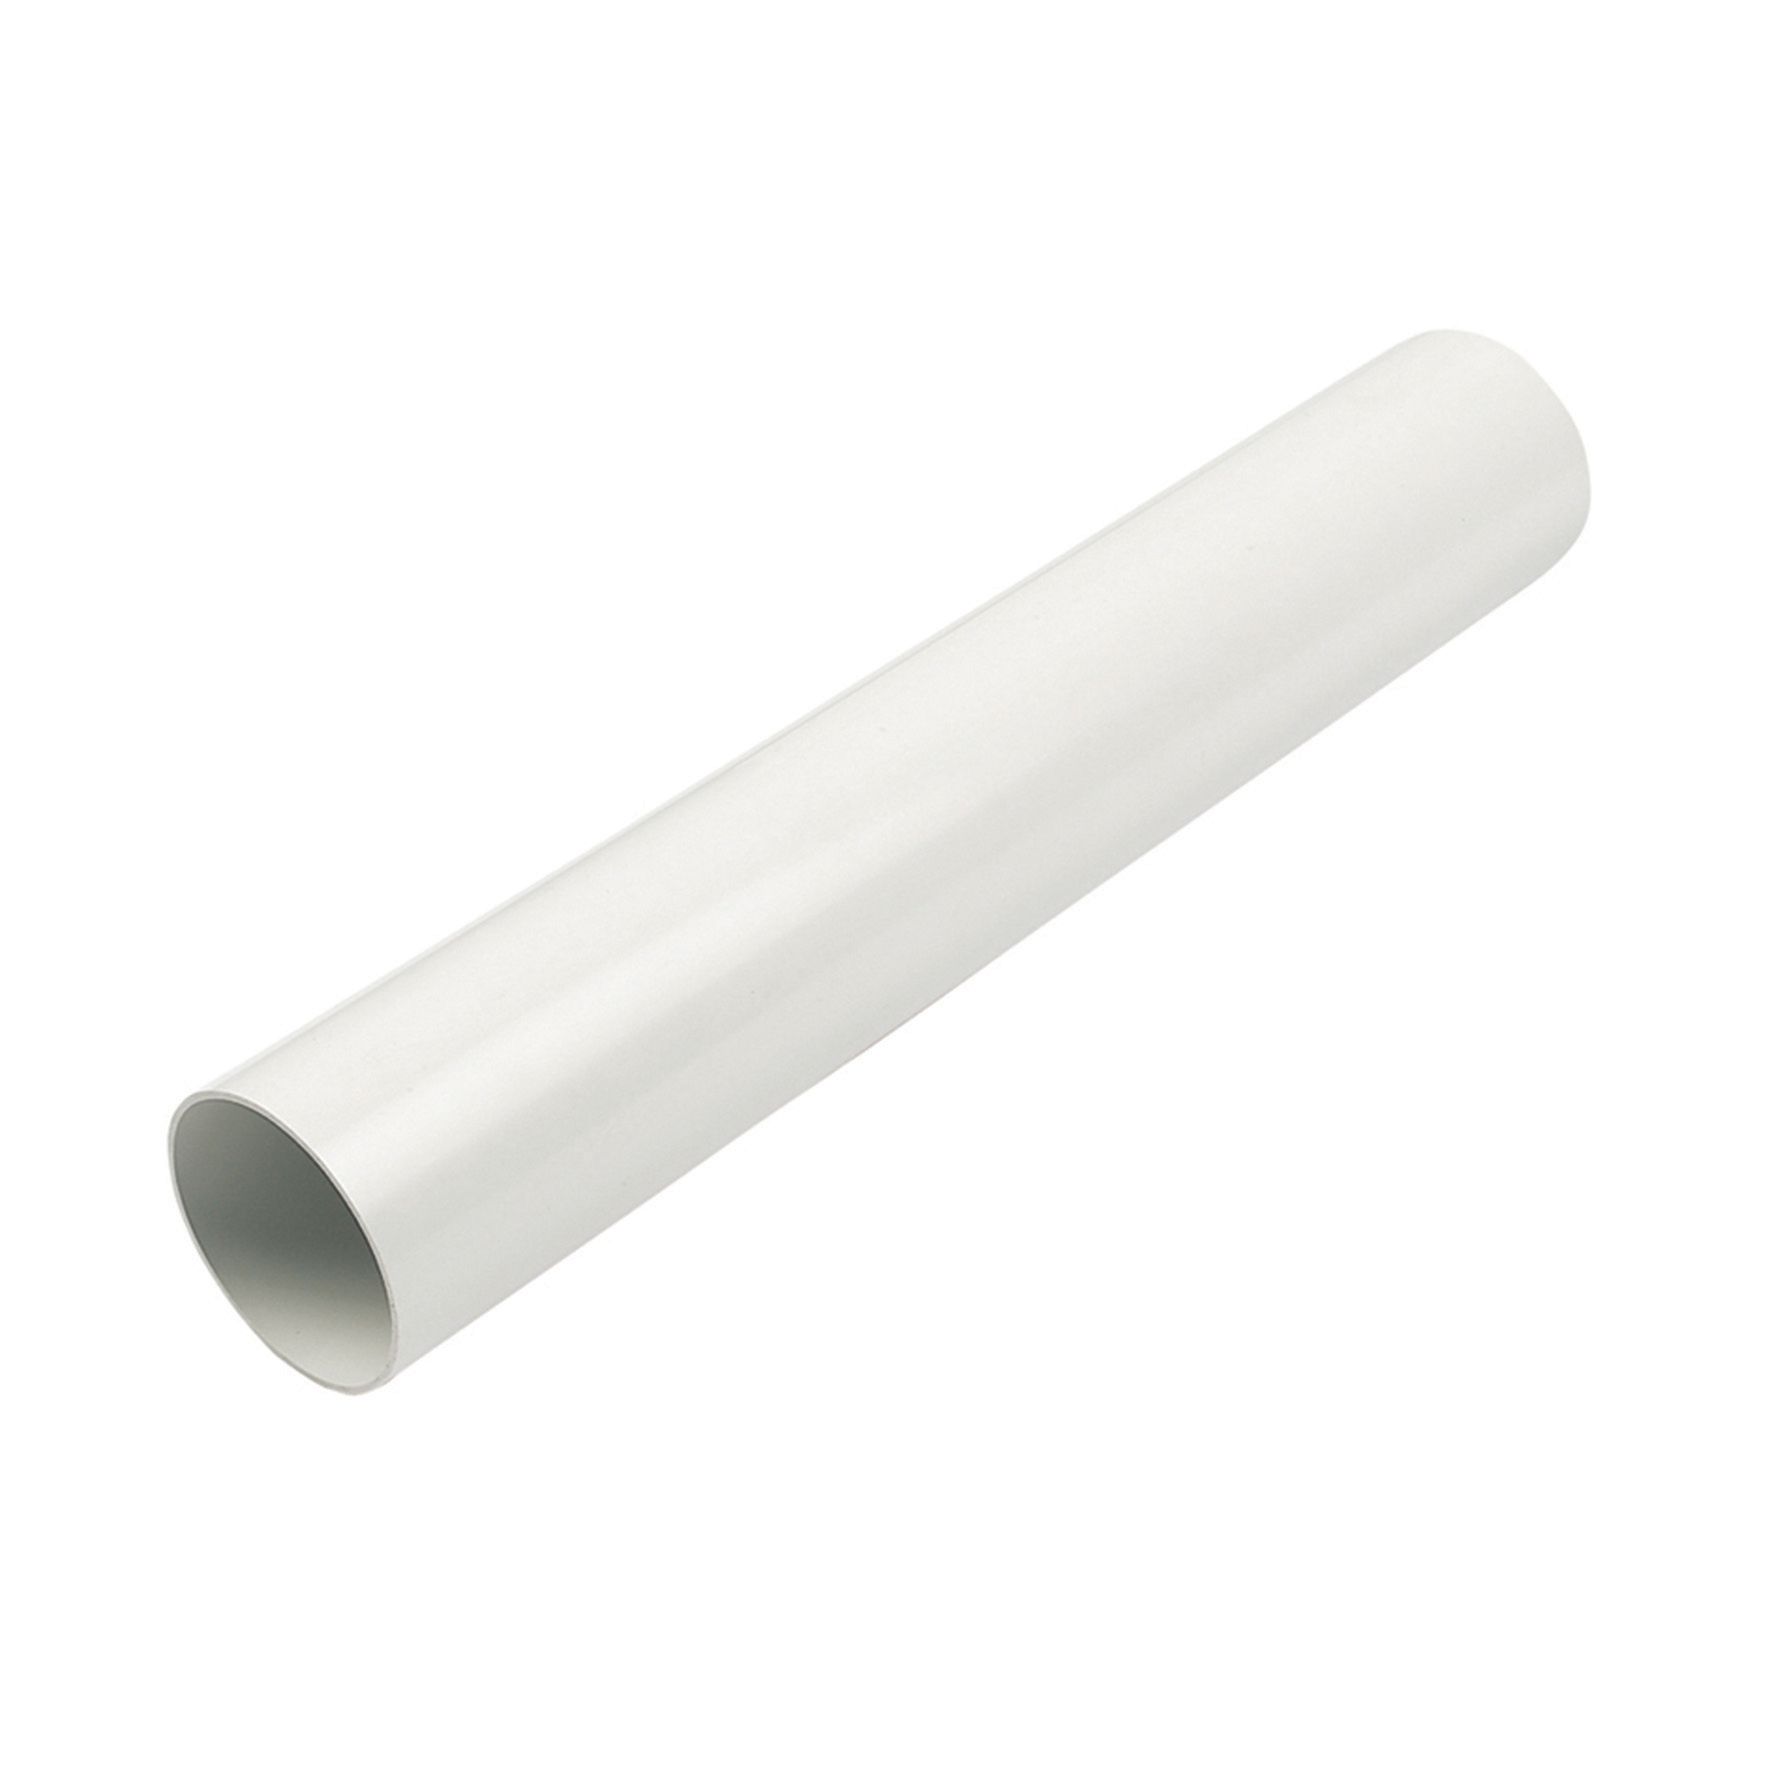 Image of FloPlast WS01W Solvent Weld Waste Pipe - White 32mm x 3m